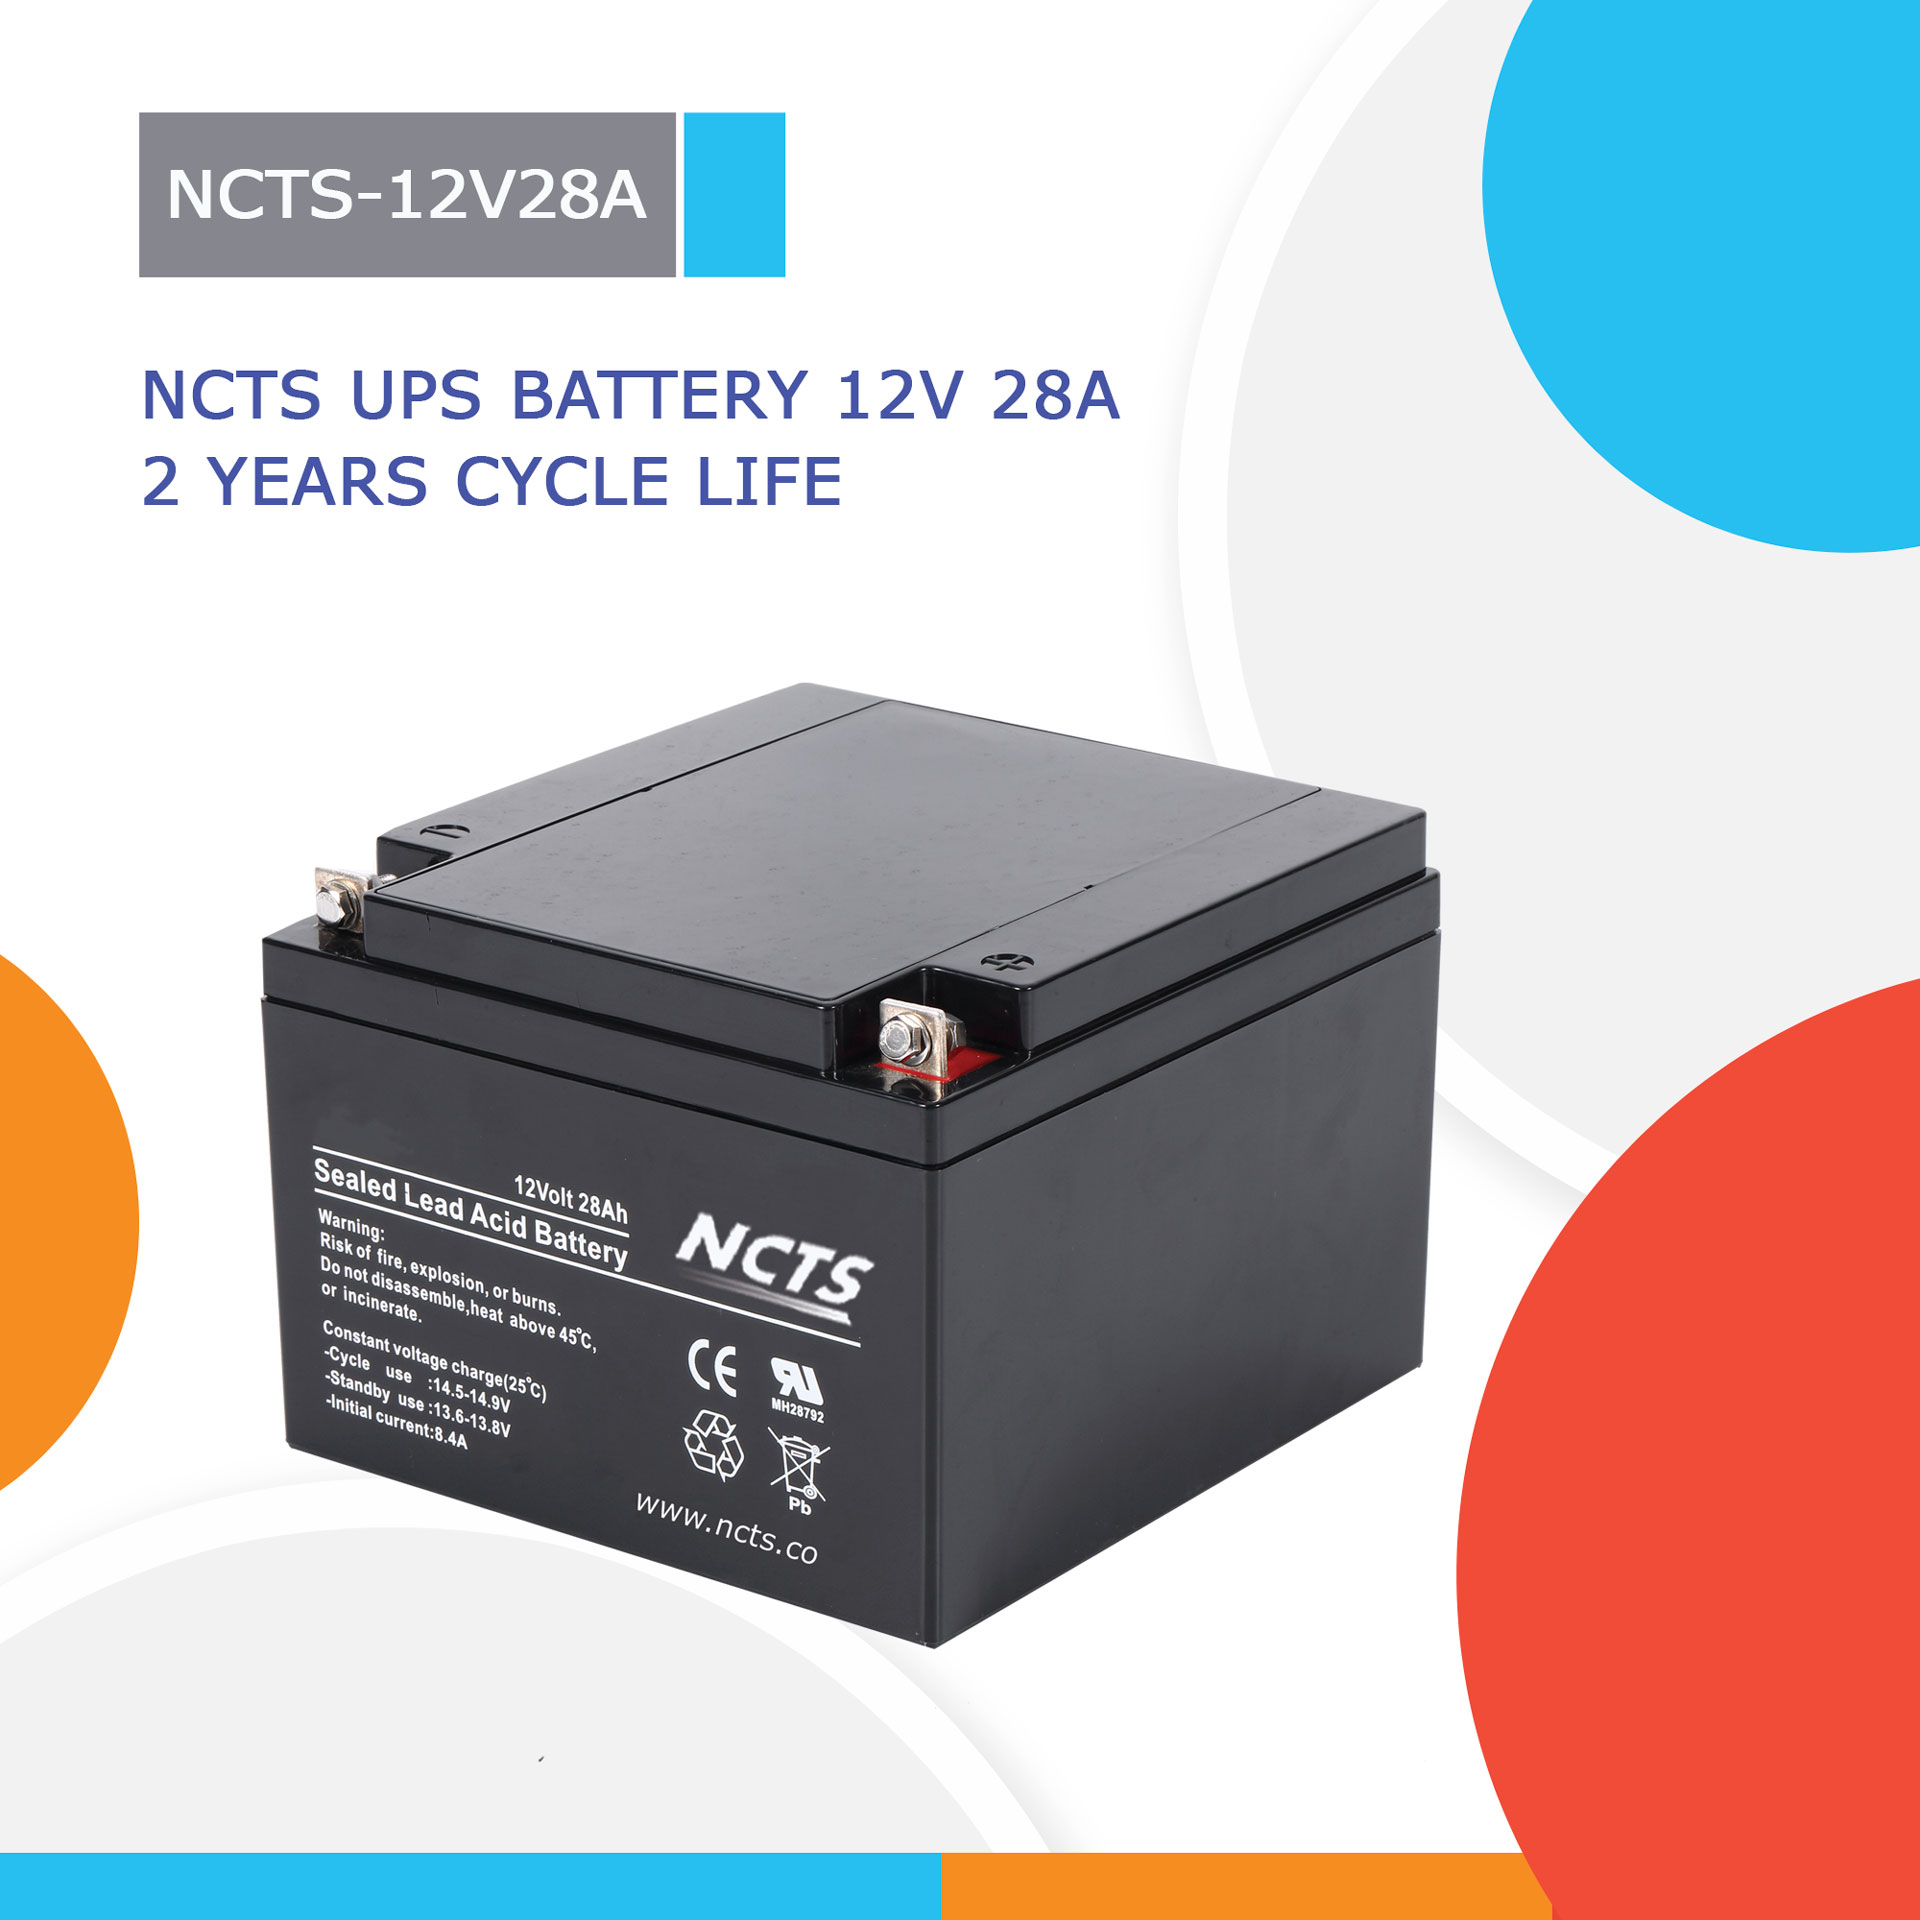 NCTS-12V28A